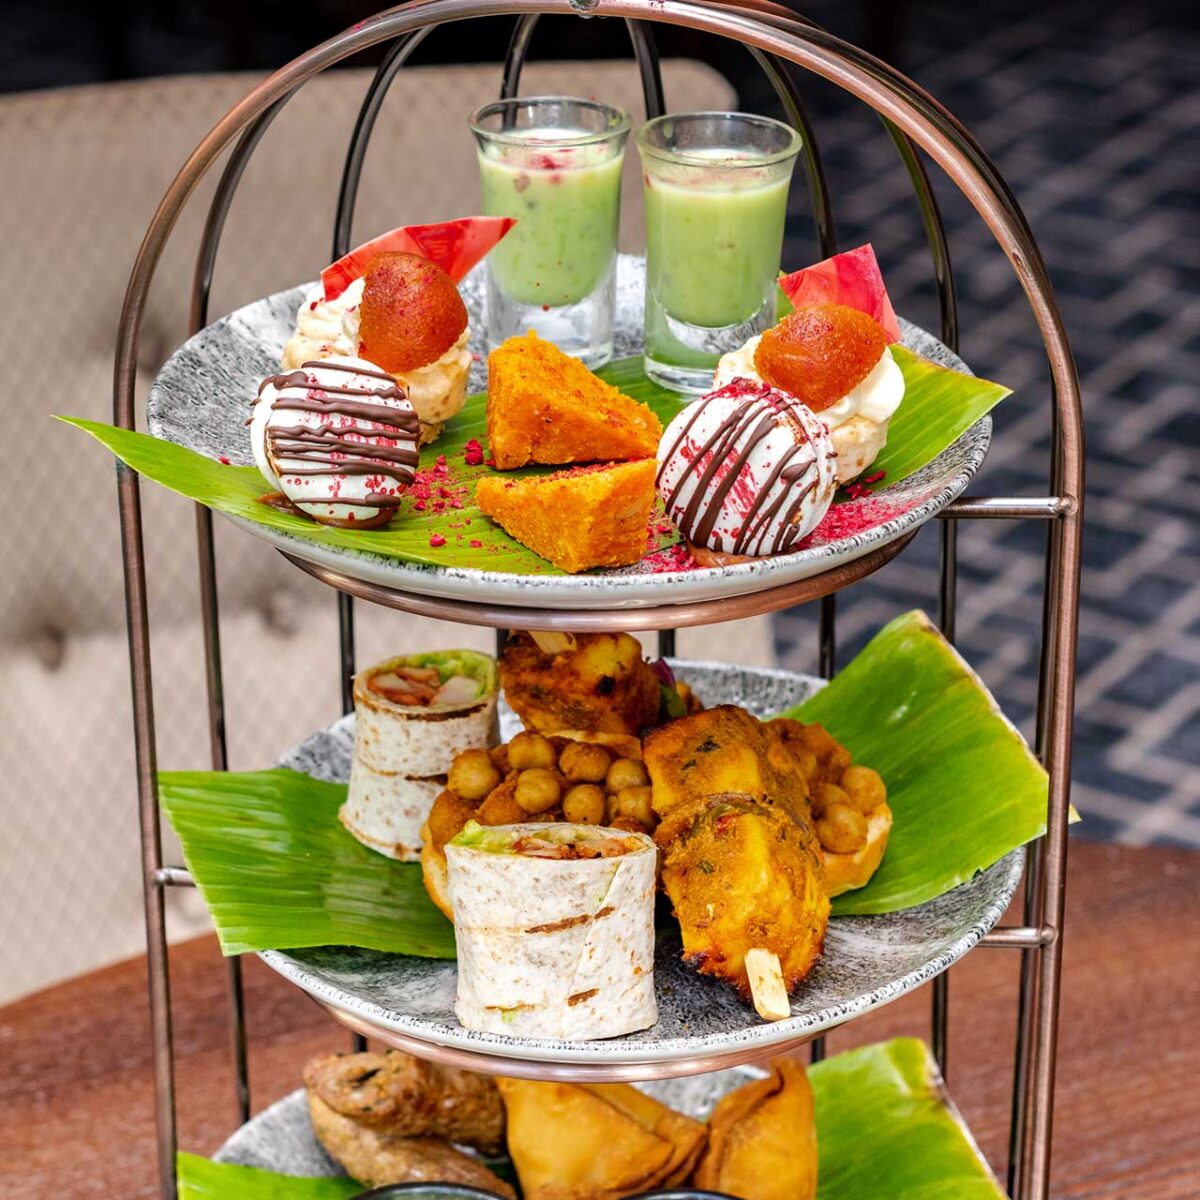 An afternoon tea in Birmingham. Platter of Indian sweets and savouries